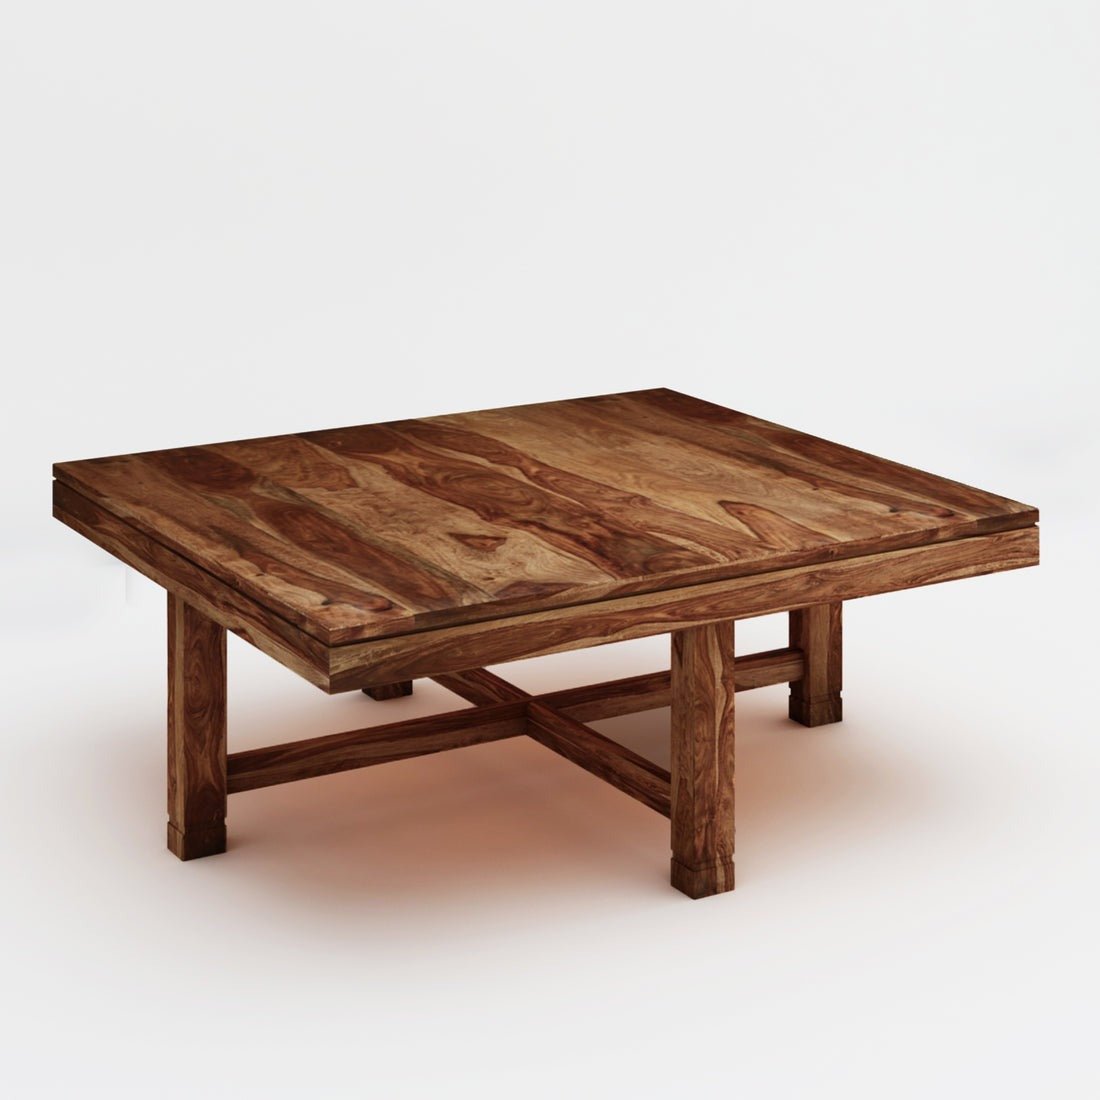 Joseph Solid Wood Coffee Table Centre Table With 4 Seating Stool For Living Room. - Torque India